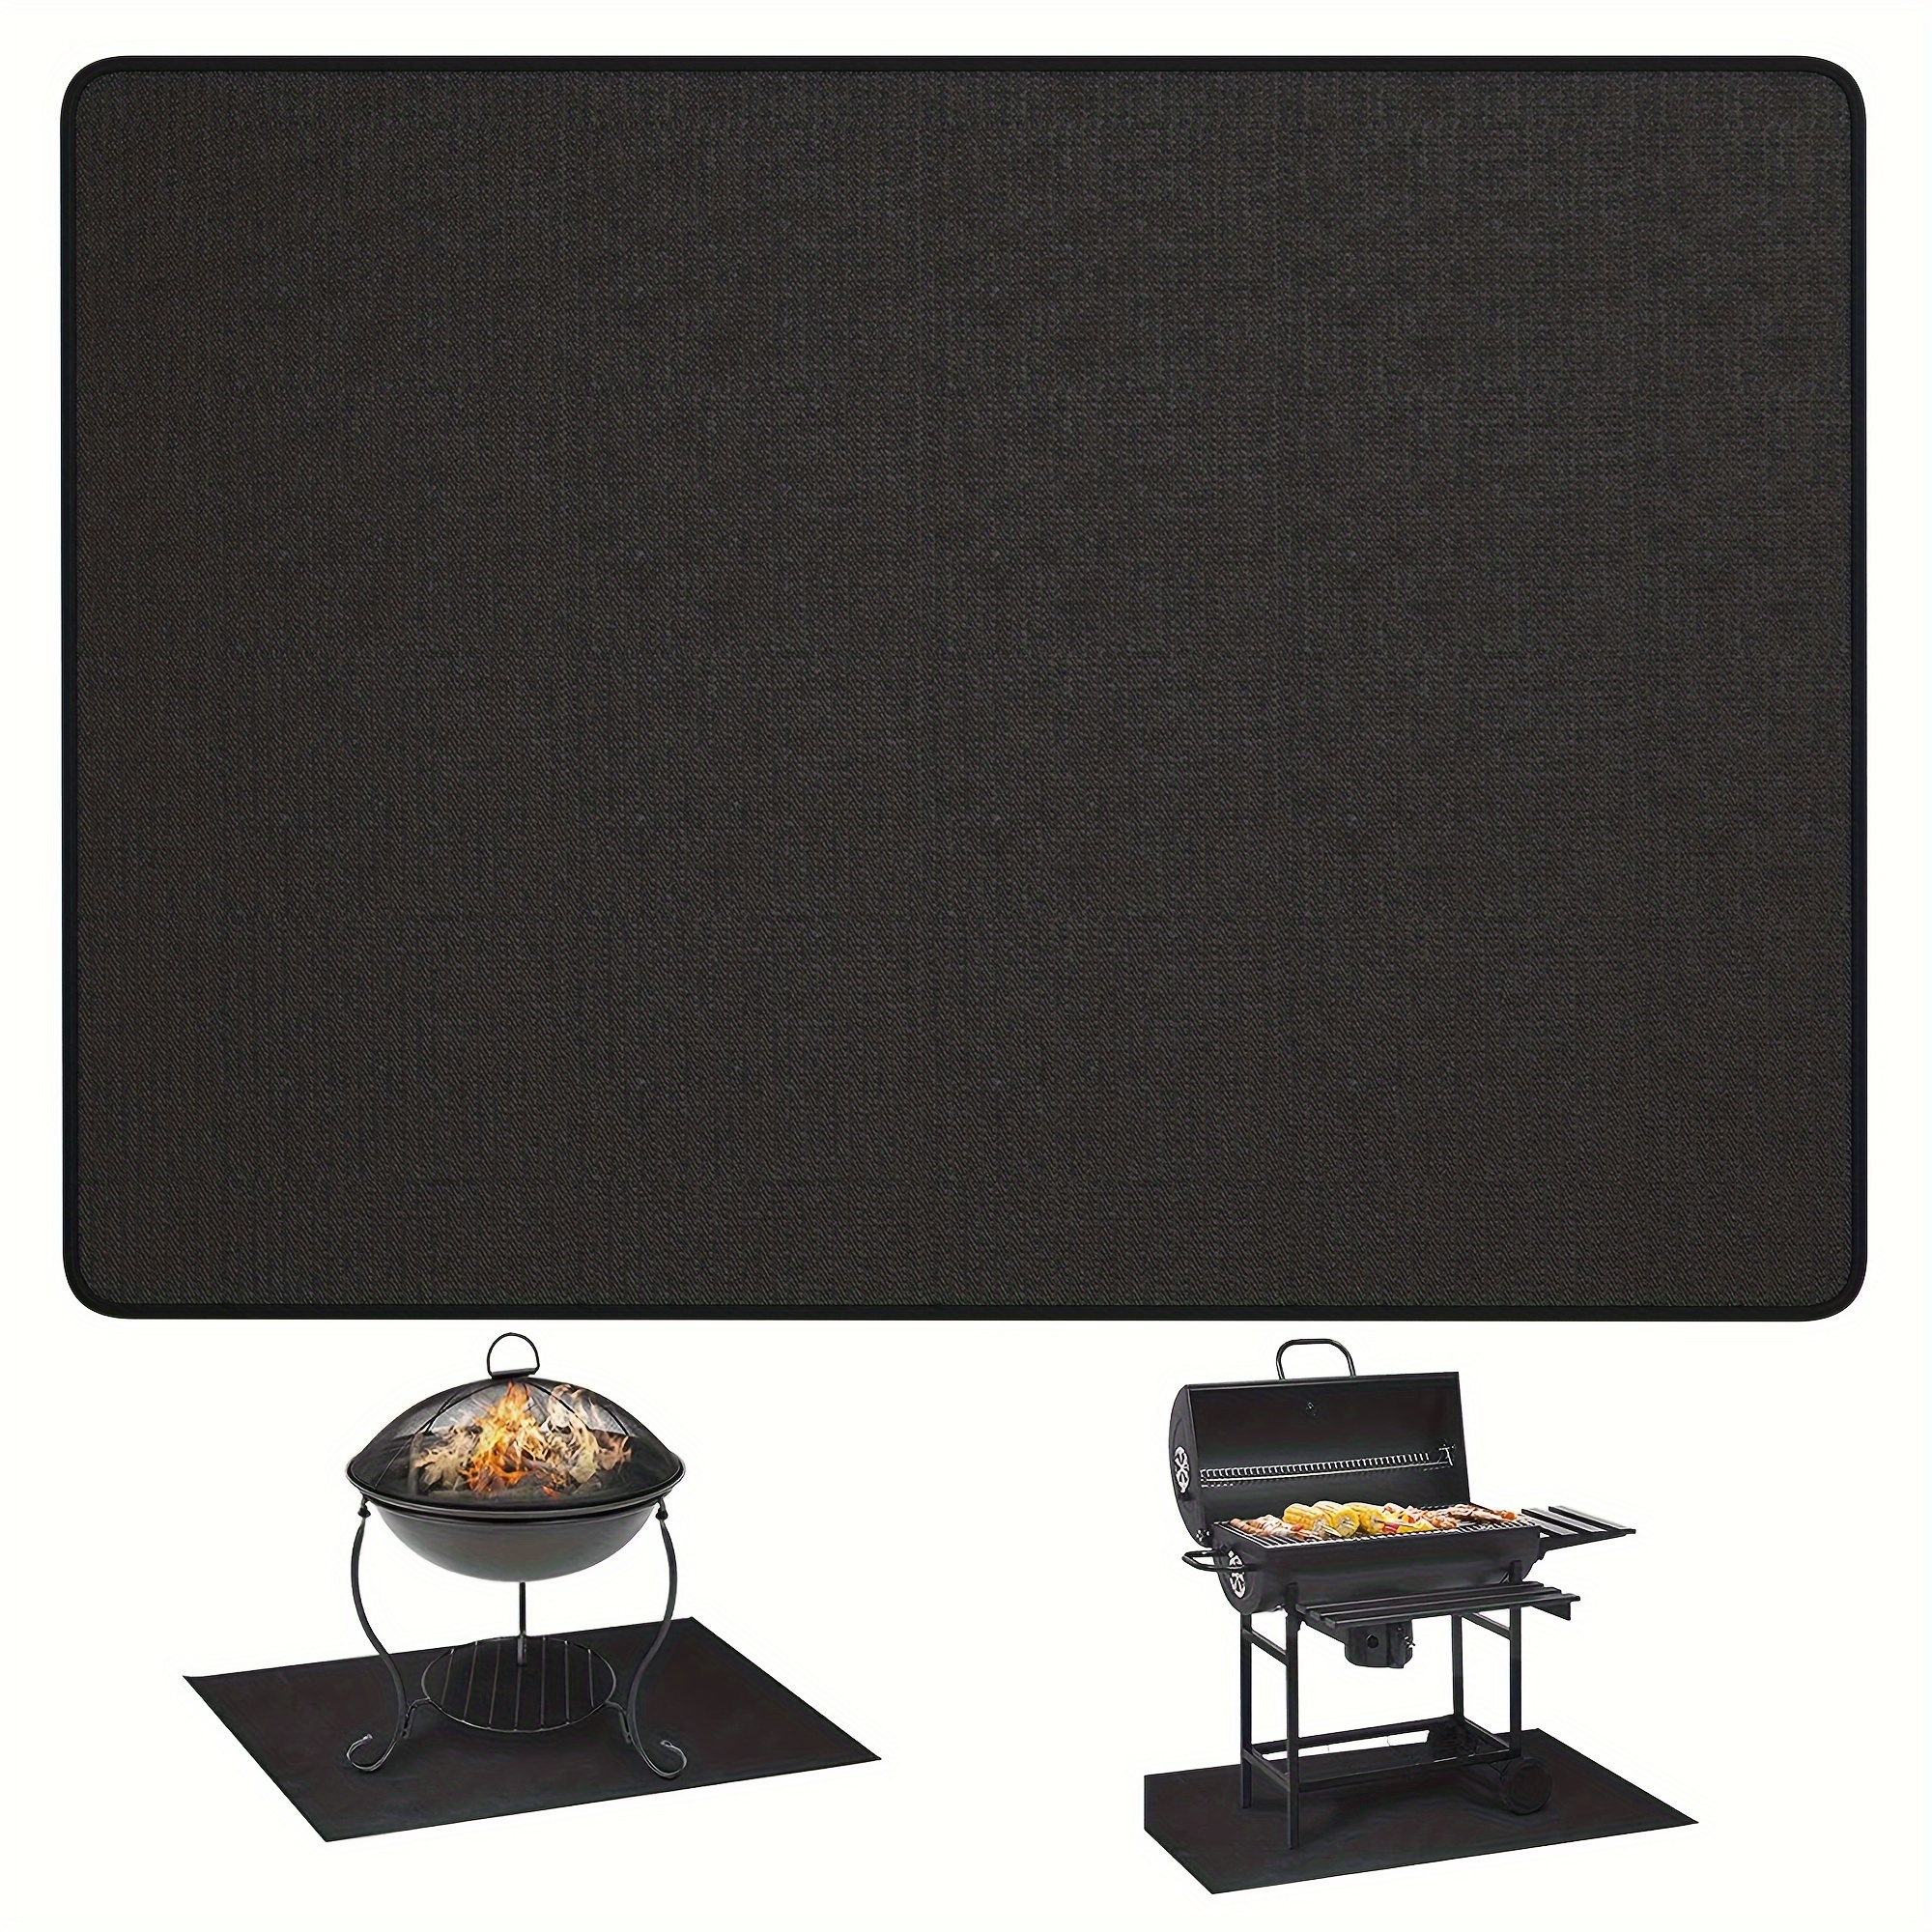 

60 * 42 Under Grill Mats For Outdoor Grill Deck Protector, Double-sided Fireproof Deck And Patio Protective Mat, Bbq Mat For Under Bbq, Oil-proof Mat For Gas Grills, Waterproof Grill Floor Pads